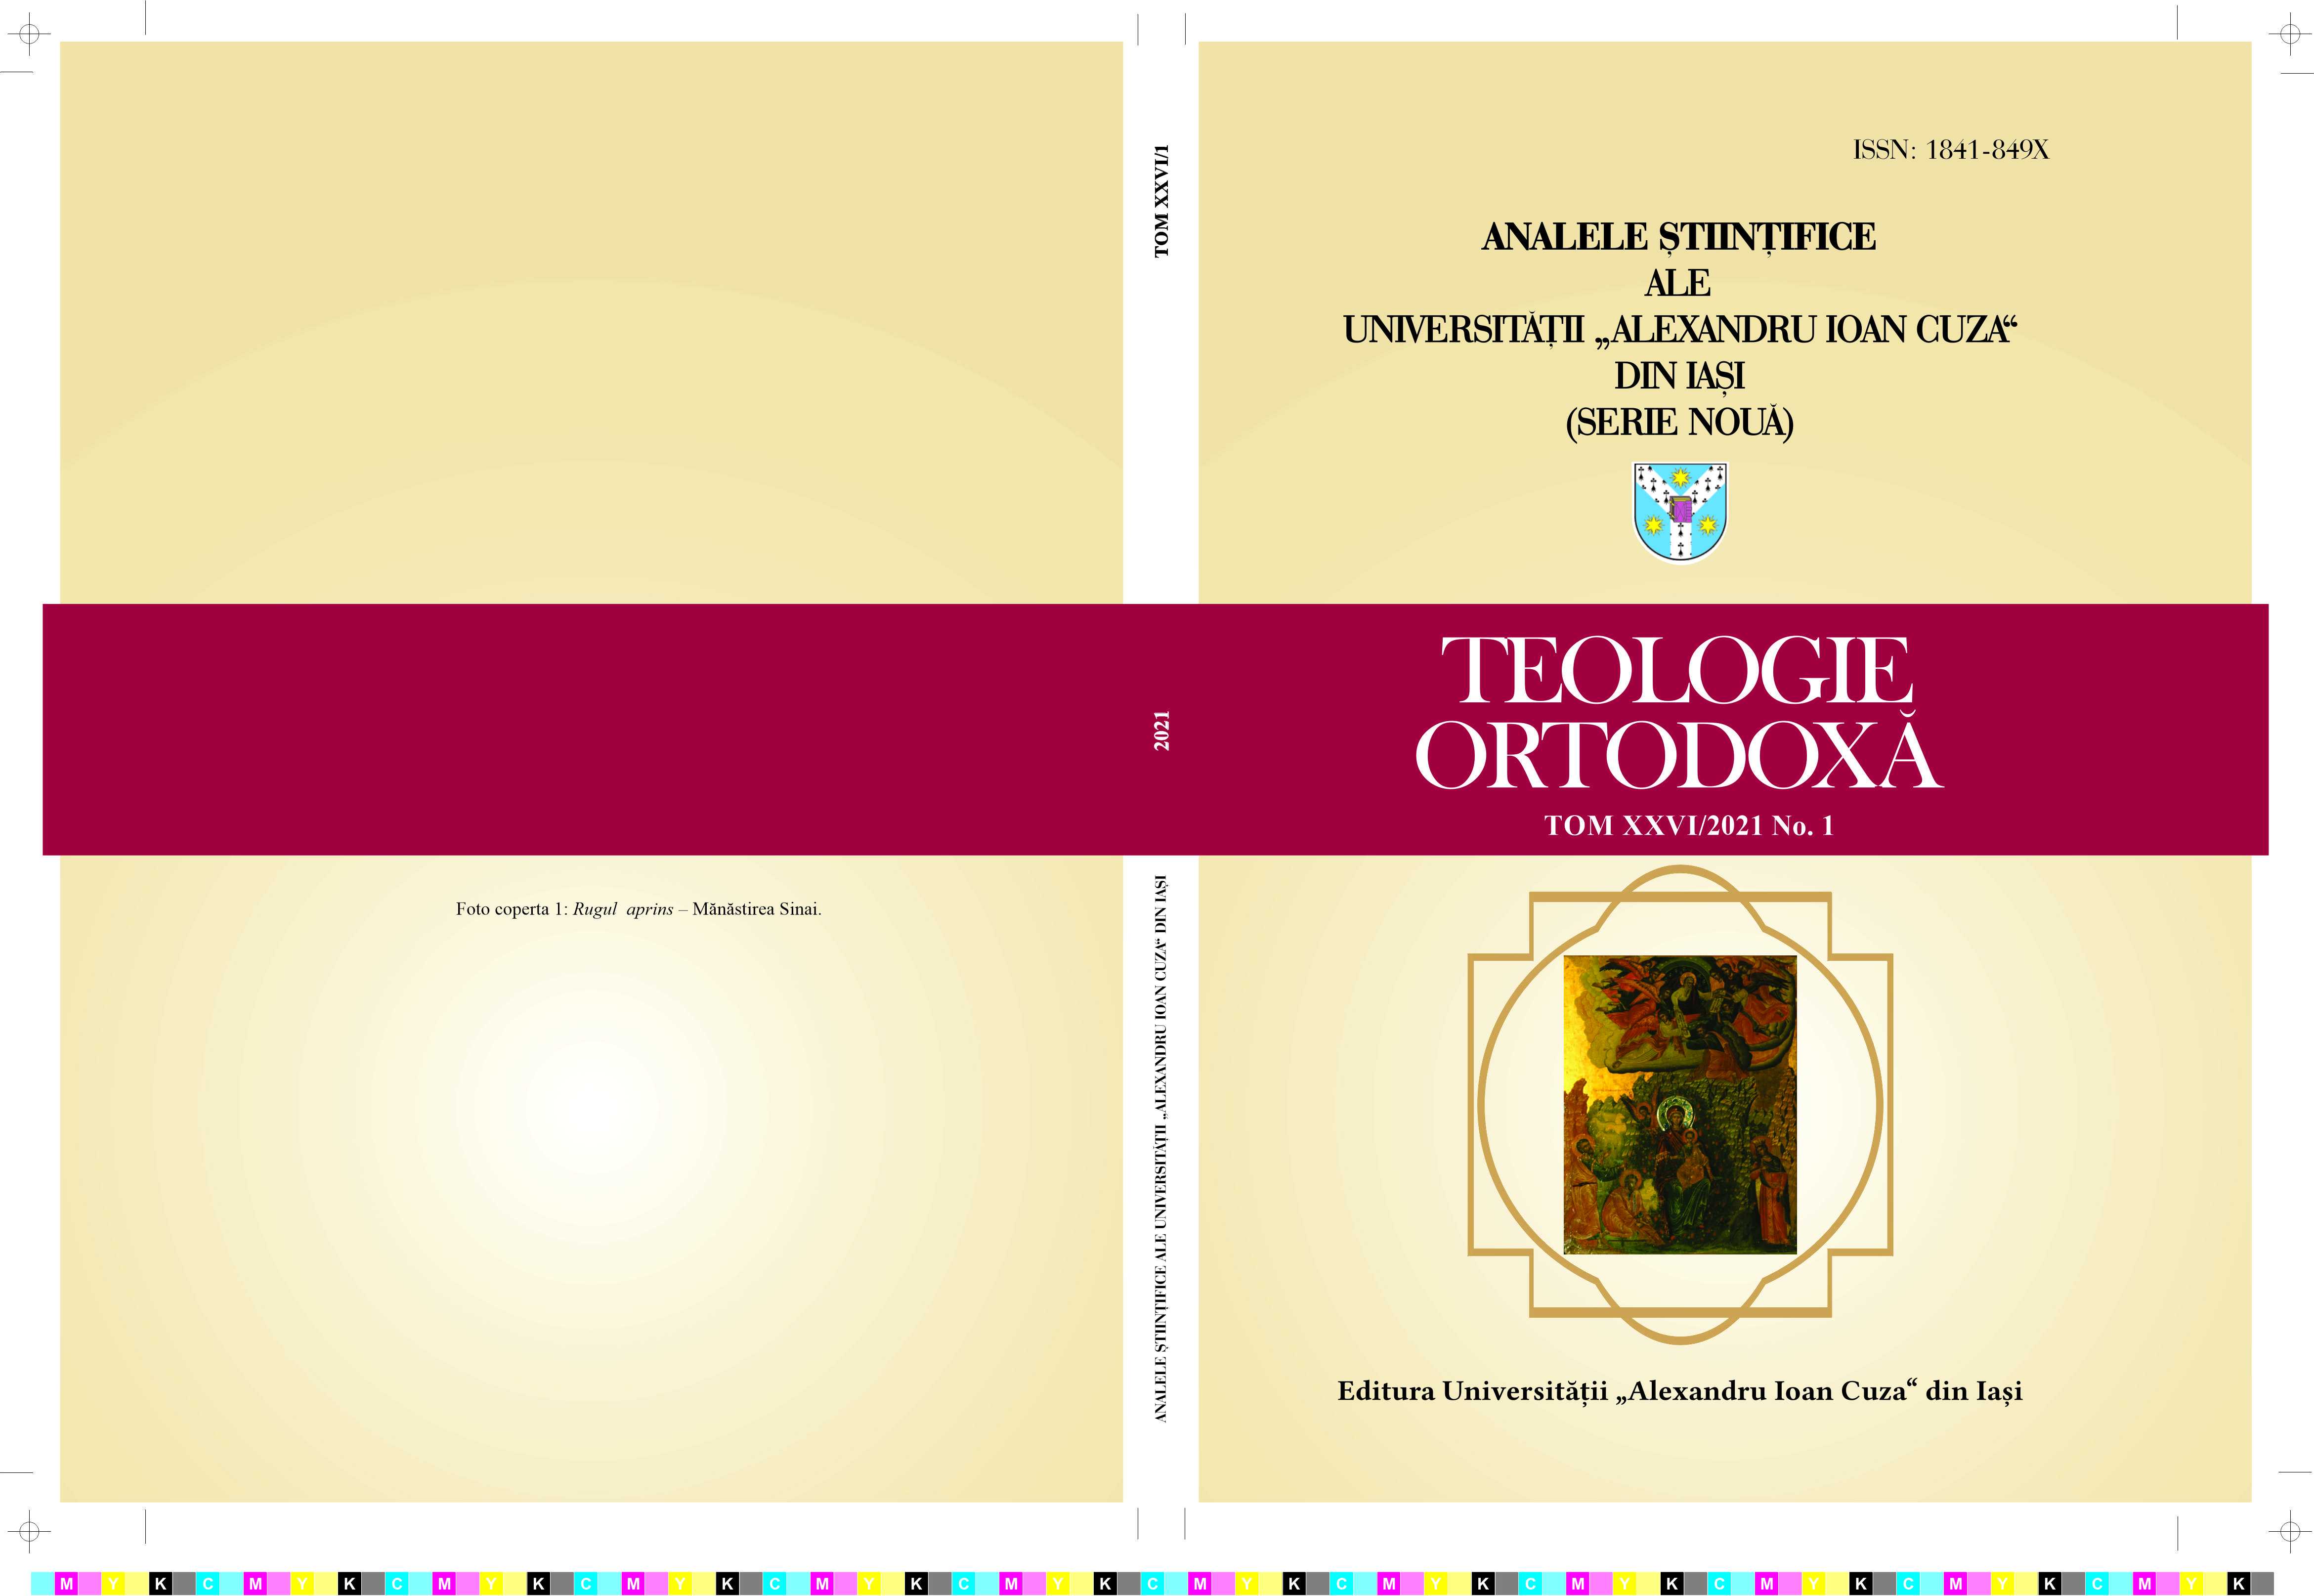 Studies and articles of biblical theology of the Old
Testament in the review “Altarul / Mitropolia Banatului”
[“The Shrine of Banat” / “The Metropolitan see of Banat”] (1944-1947; 1951-2020)